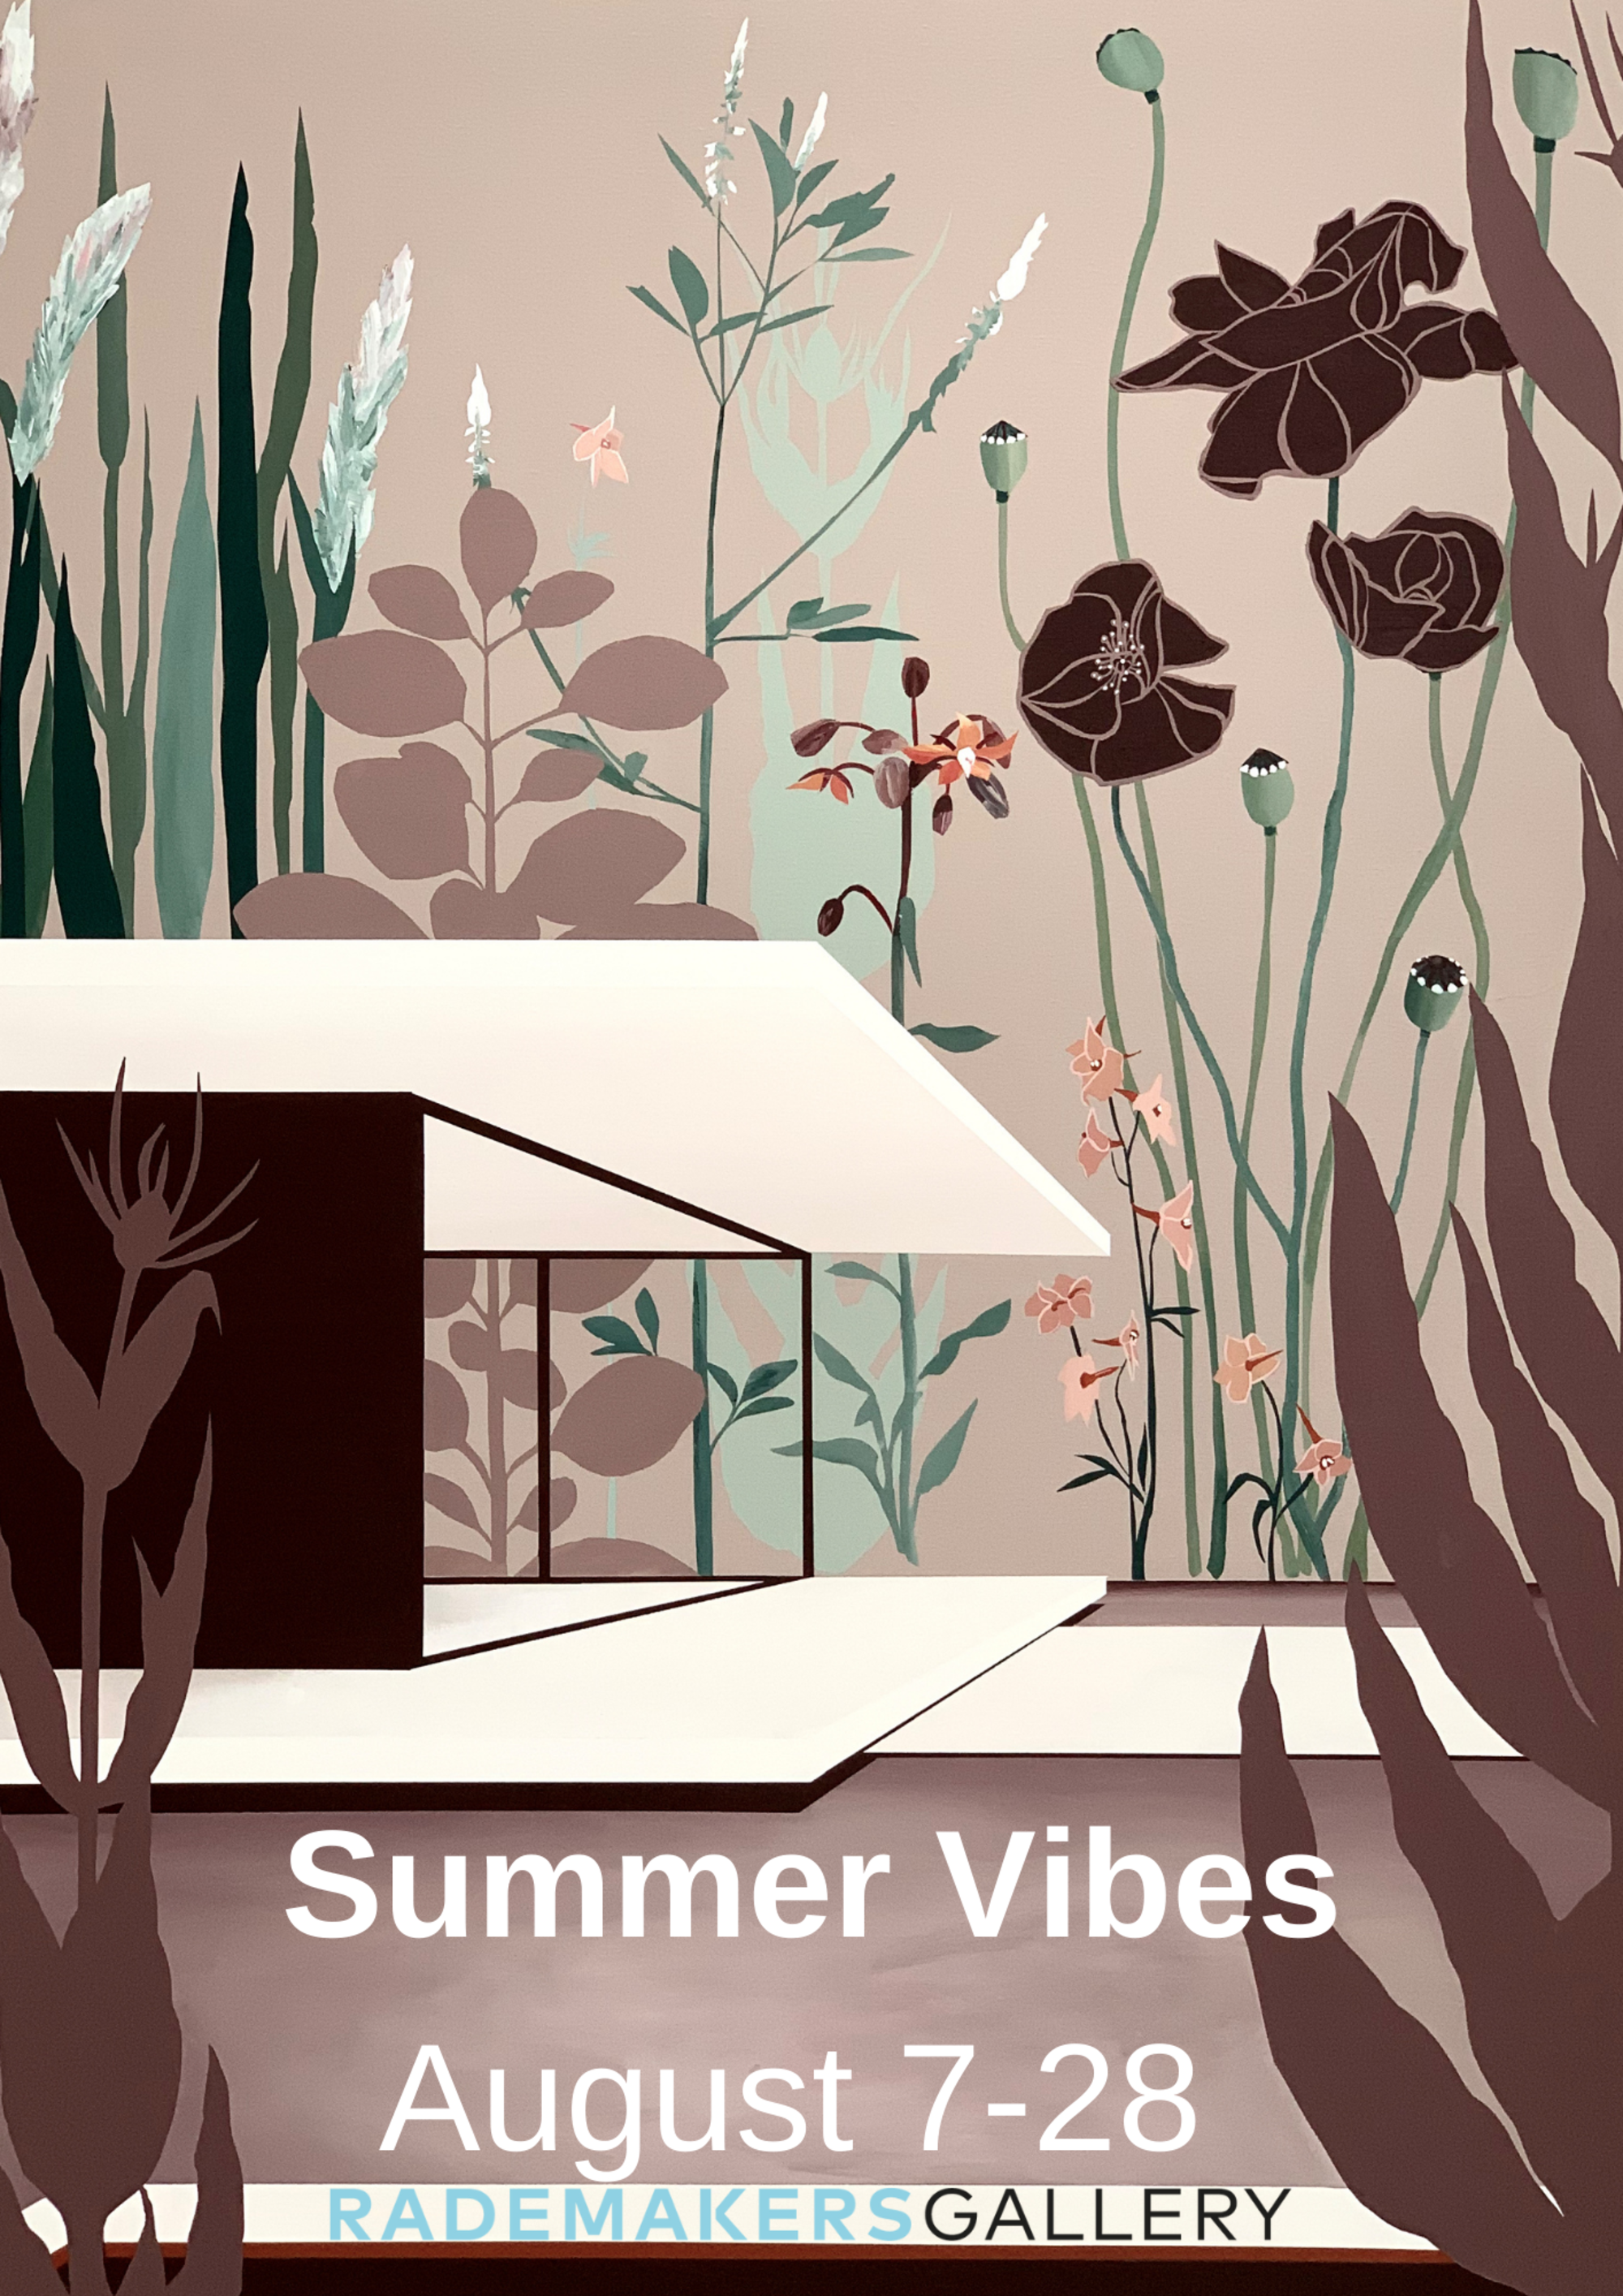 Exhibition 'Summer Vibes', Rademakers Gallery / 7-28 August 2021